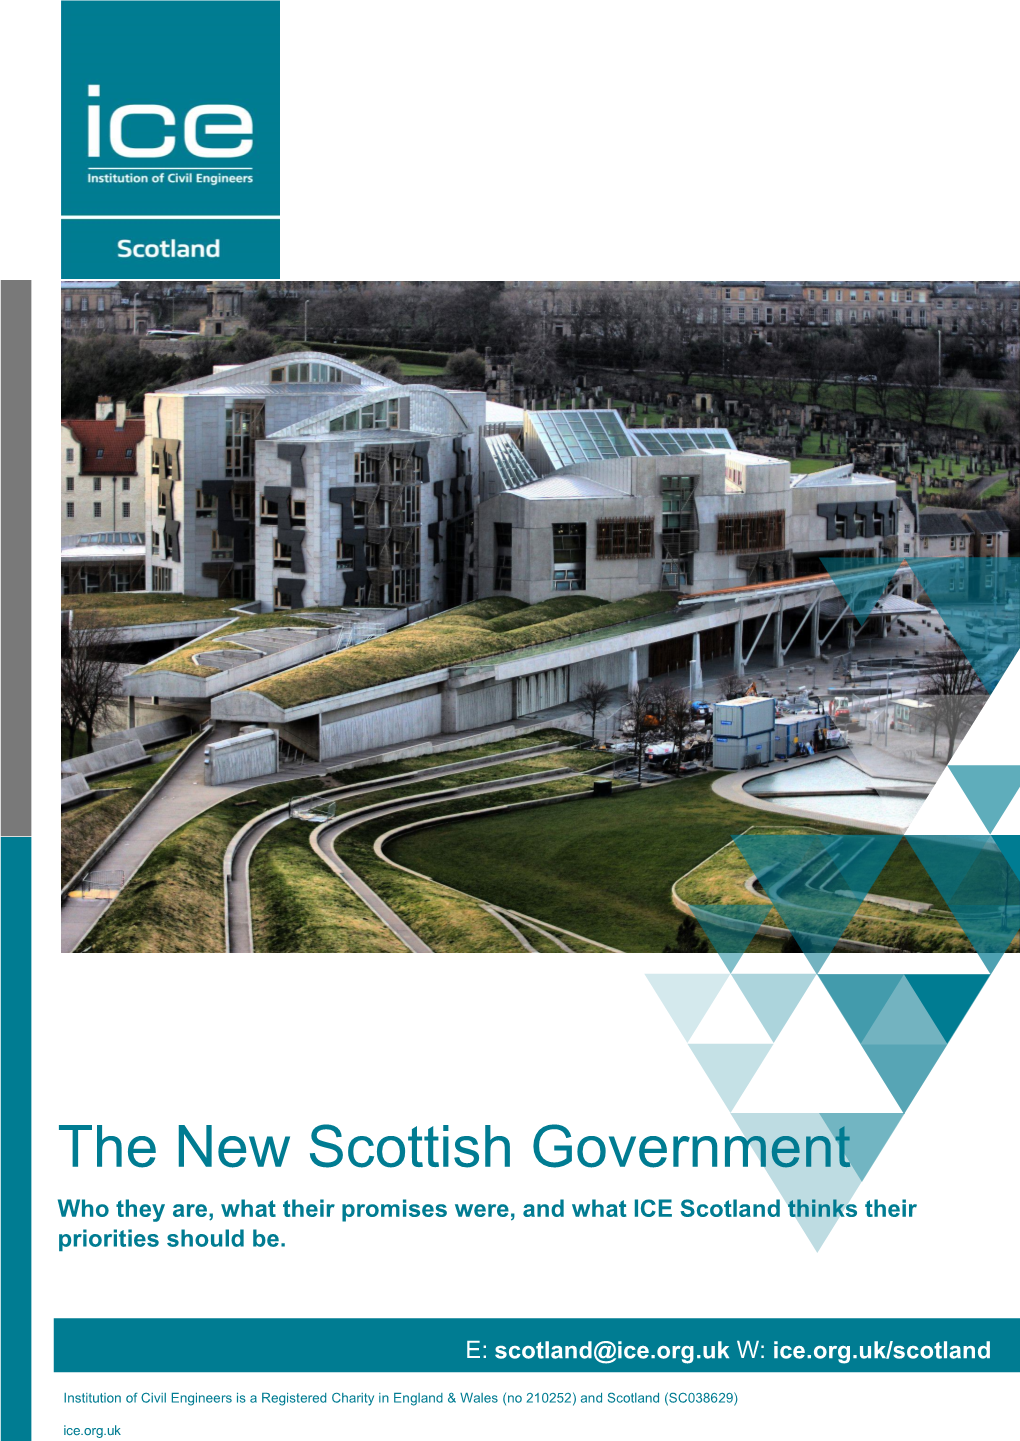 The New Scottish Government Who They Are, What Their Promises Were, and What ICE Scotland Thinks Their Priorities Should Be